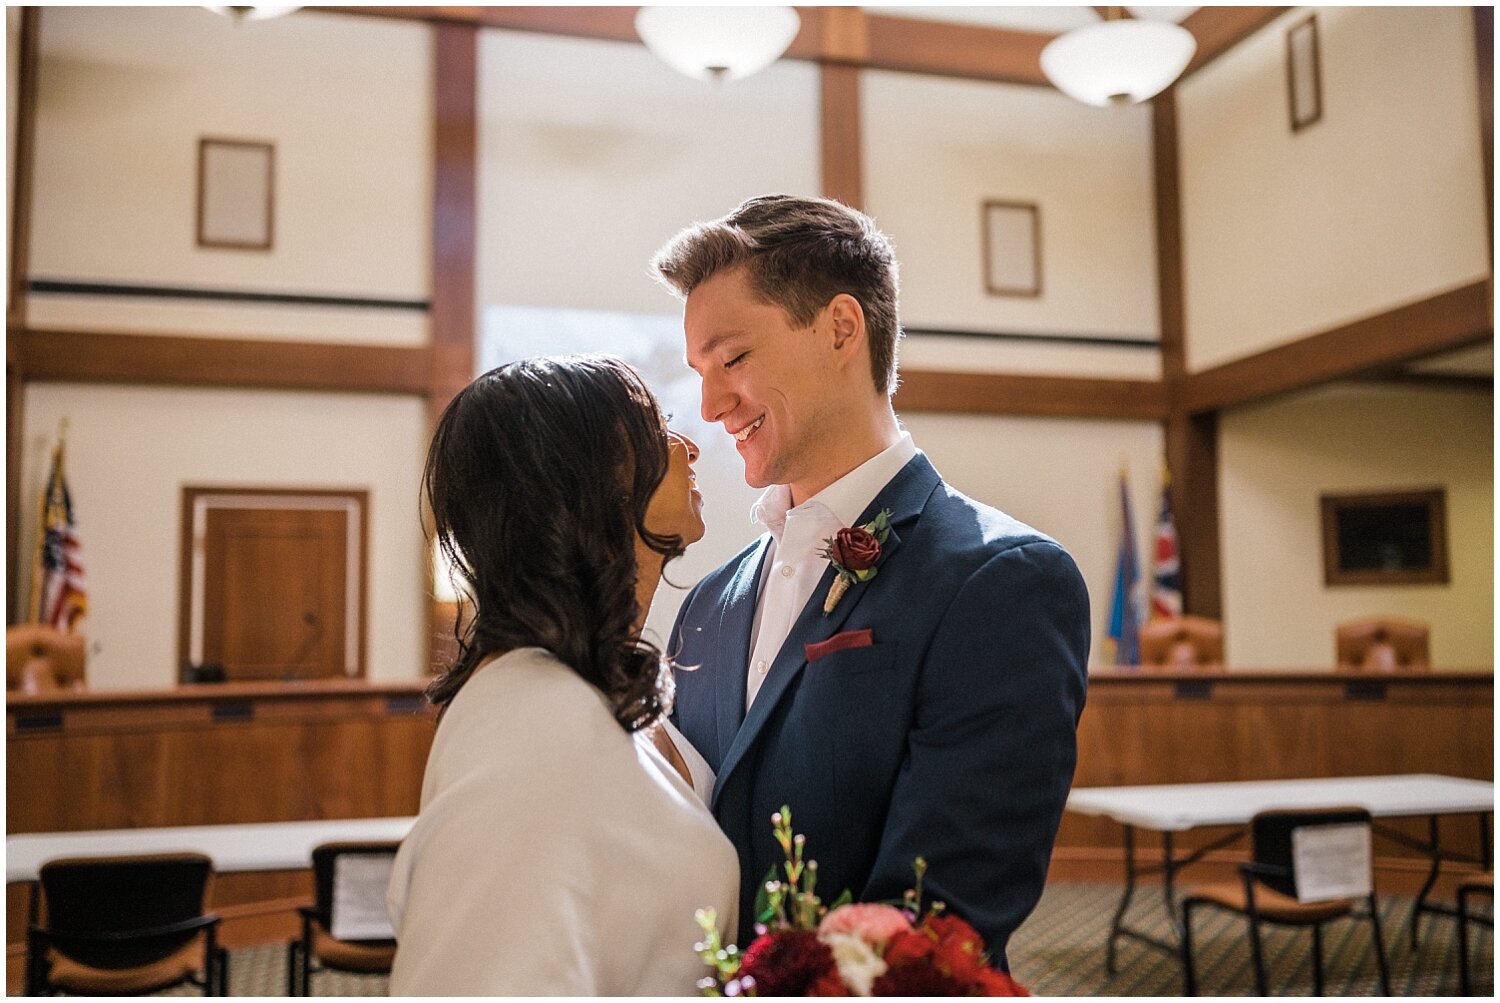 Intimate Courthouse Elopement | Oakwood, OH